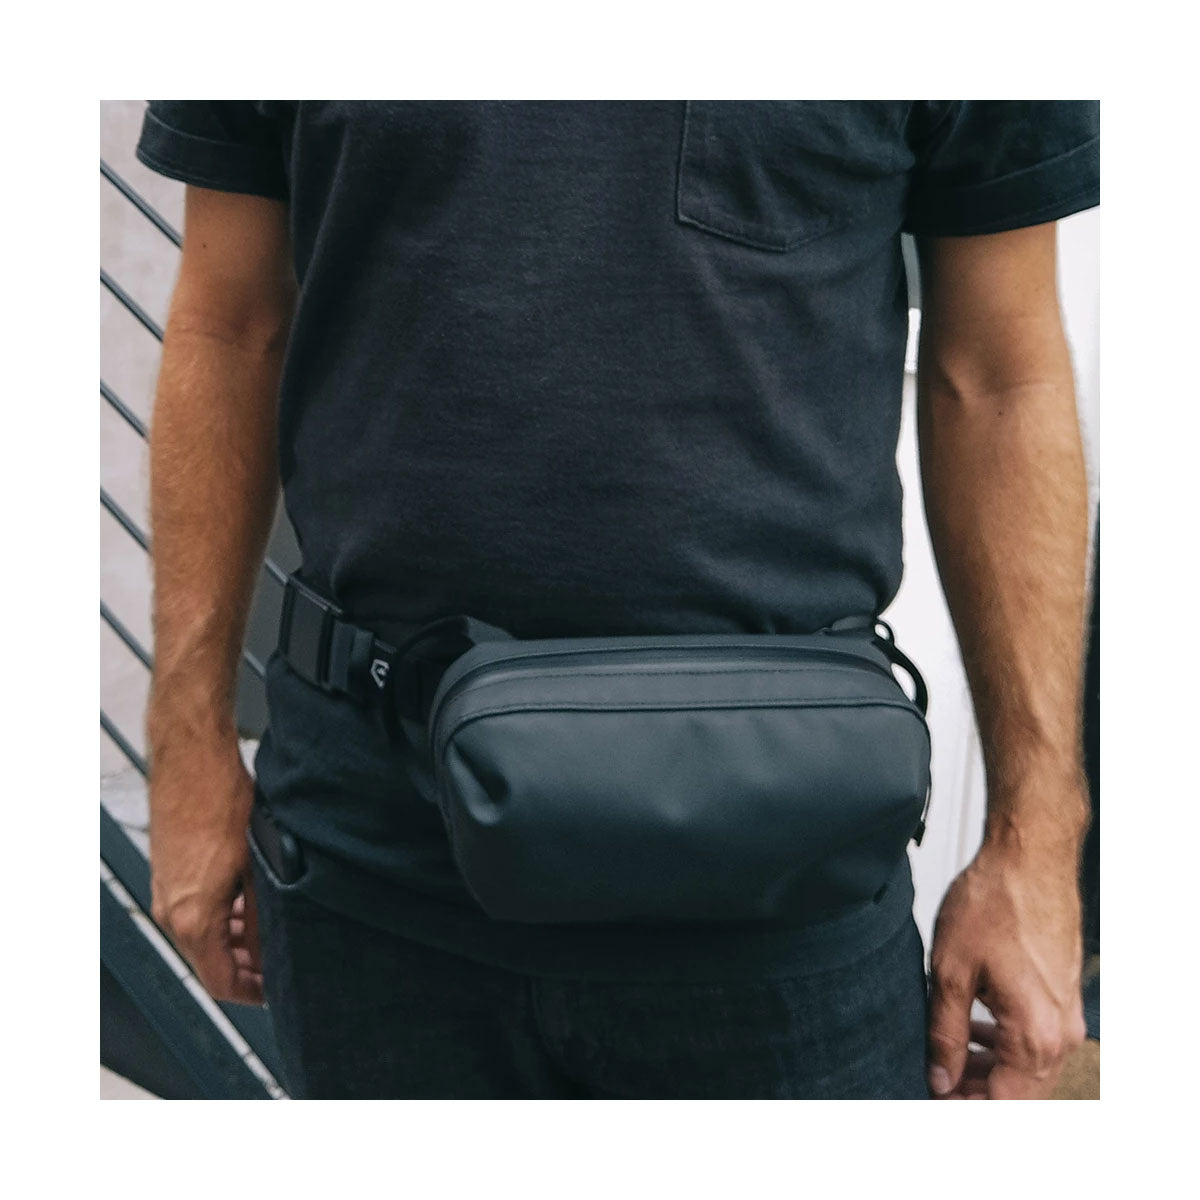 WANDRD D1 Fanny Pack Review